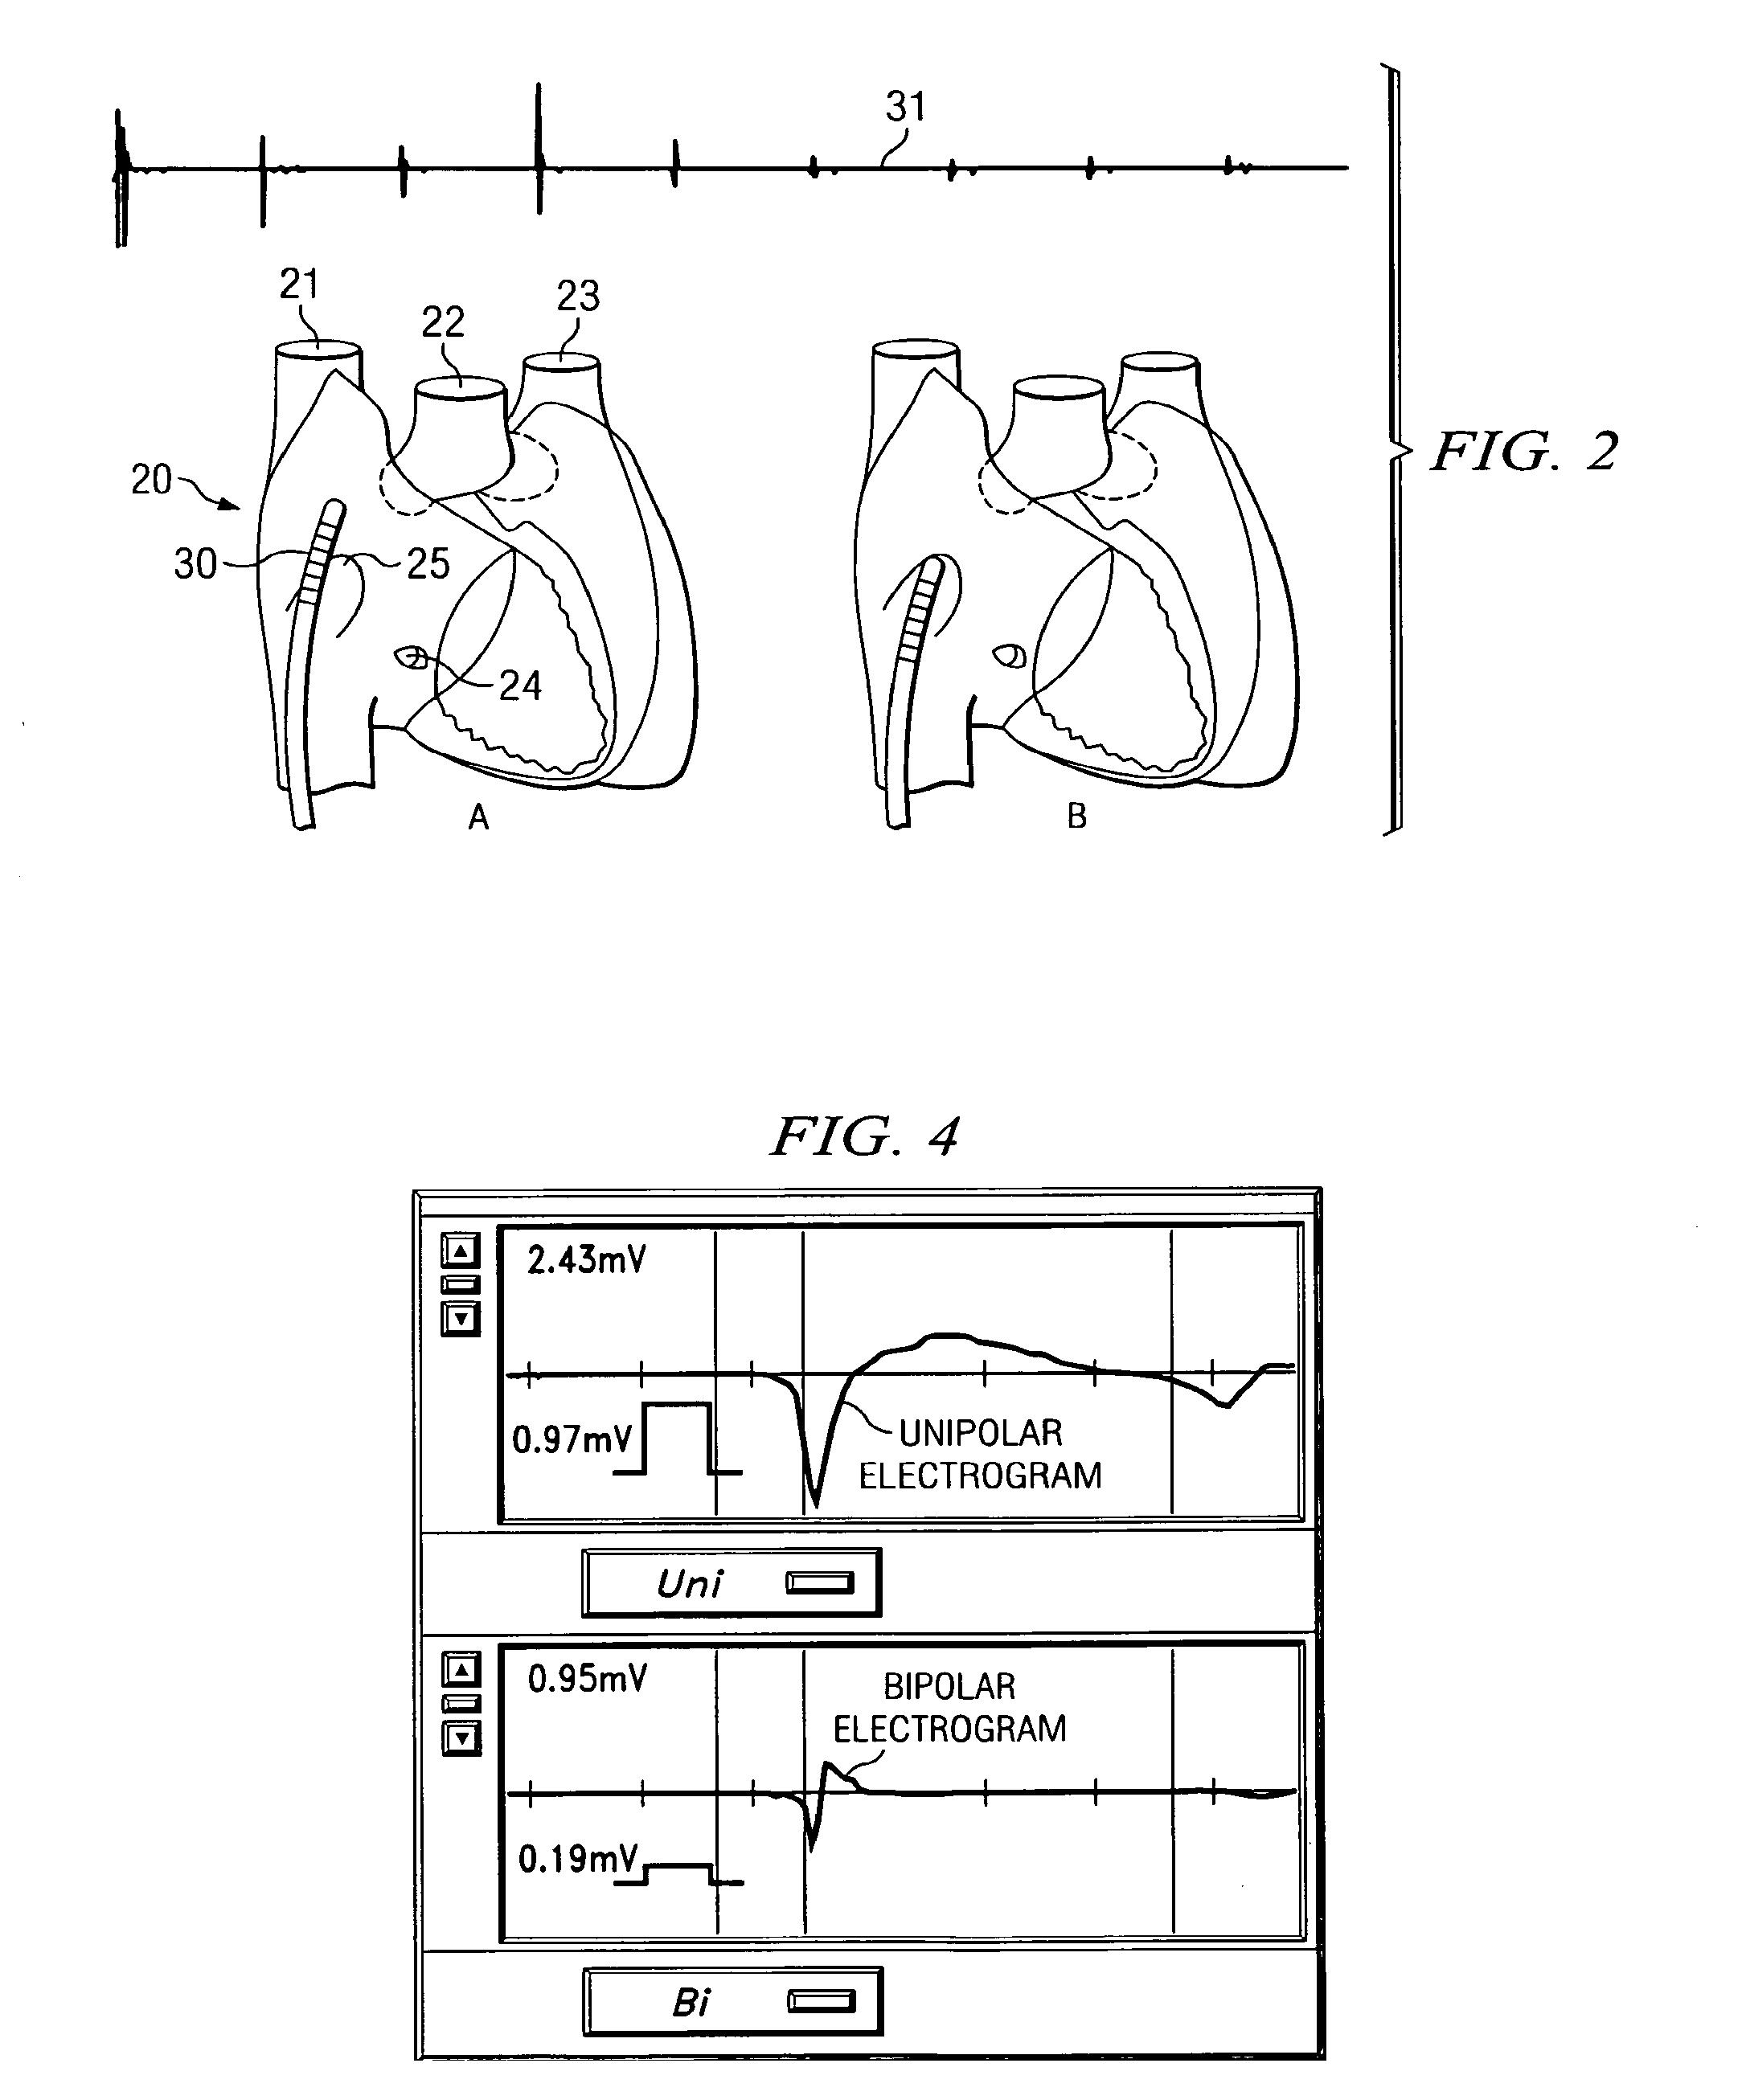 Methods and Apparatus for Locating the Fossa Ovalis and Performing Transseptal Puncture